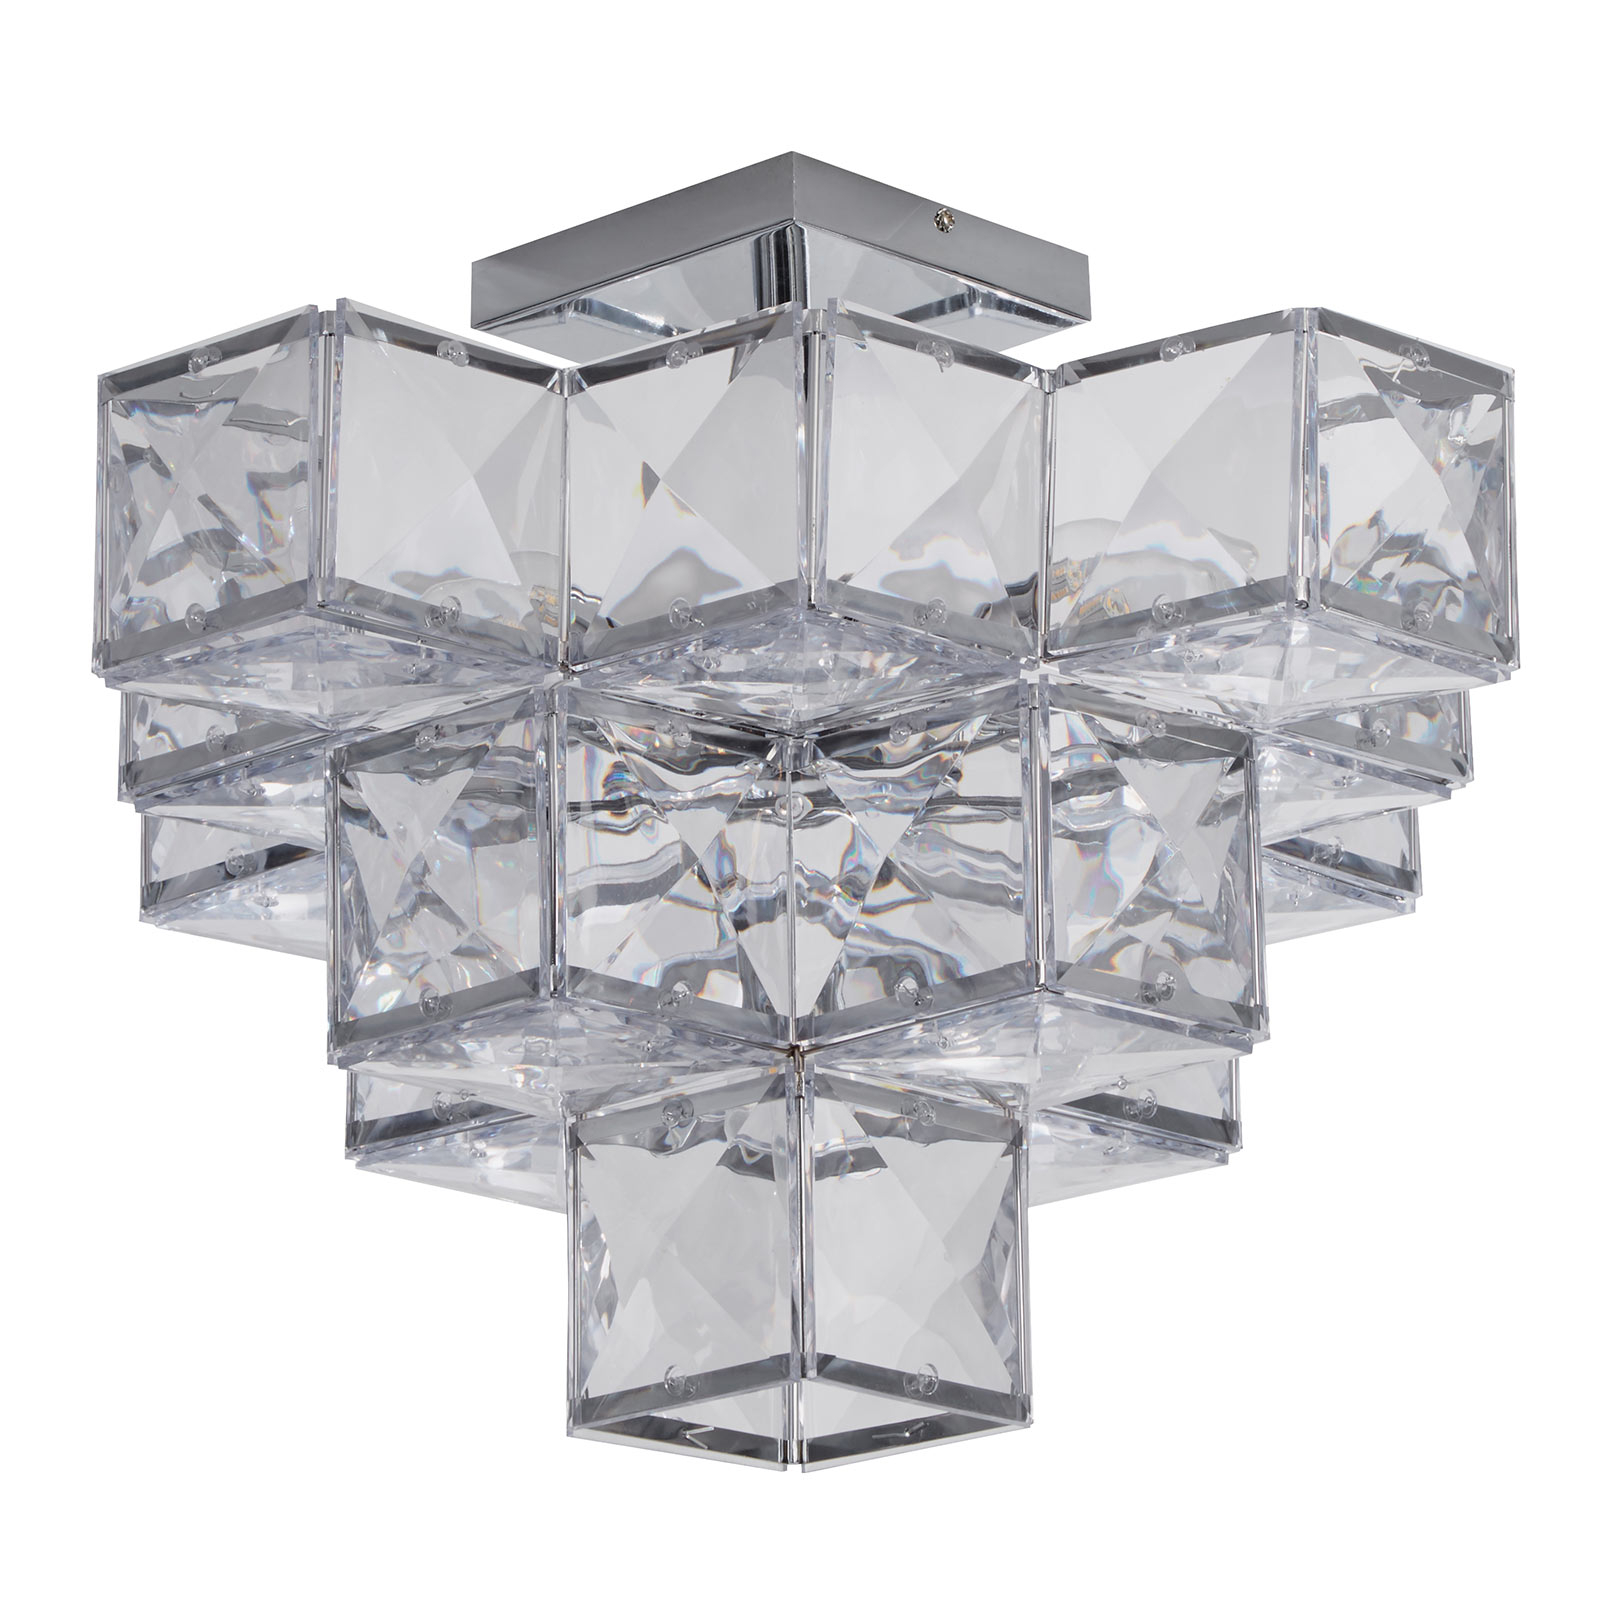 Glacier ceiling light, acrylic lampshade, clear